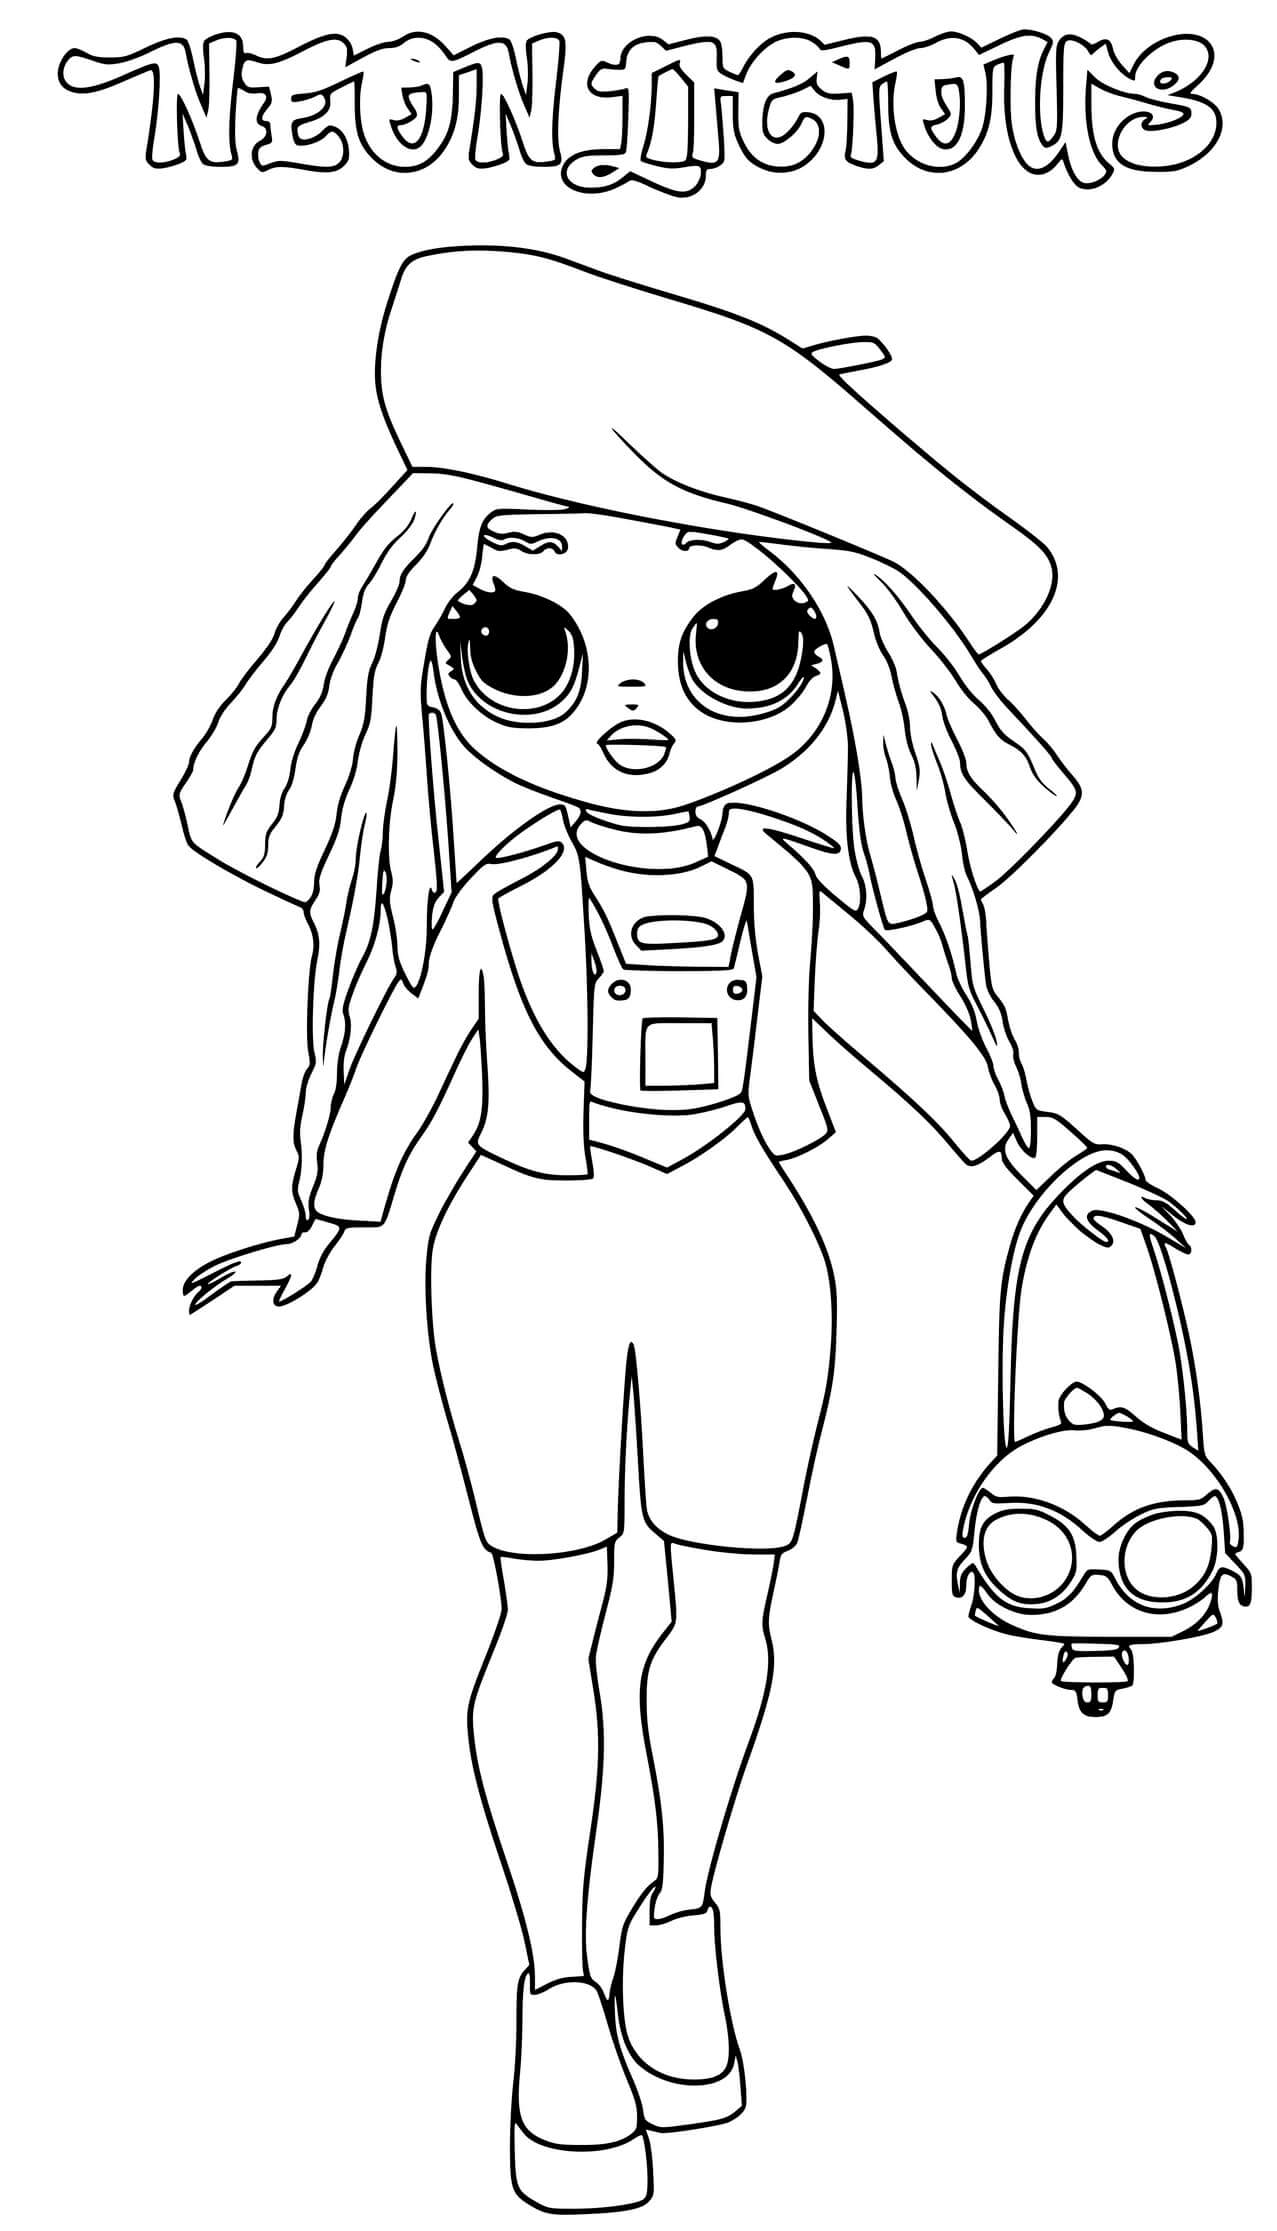 Neonlicious Lol Omg Coloring Pages   Coloring Cool